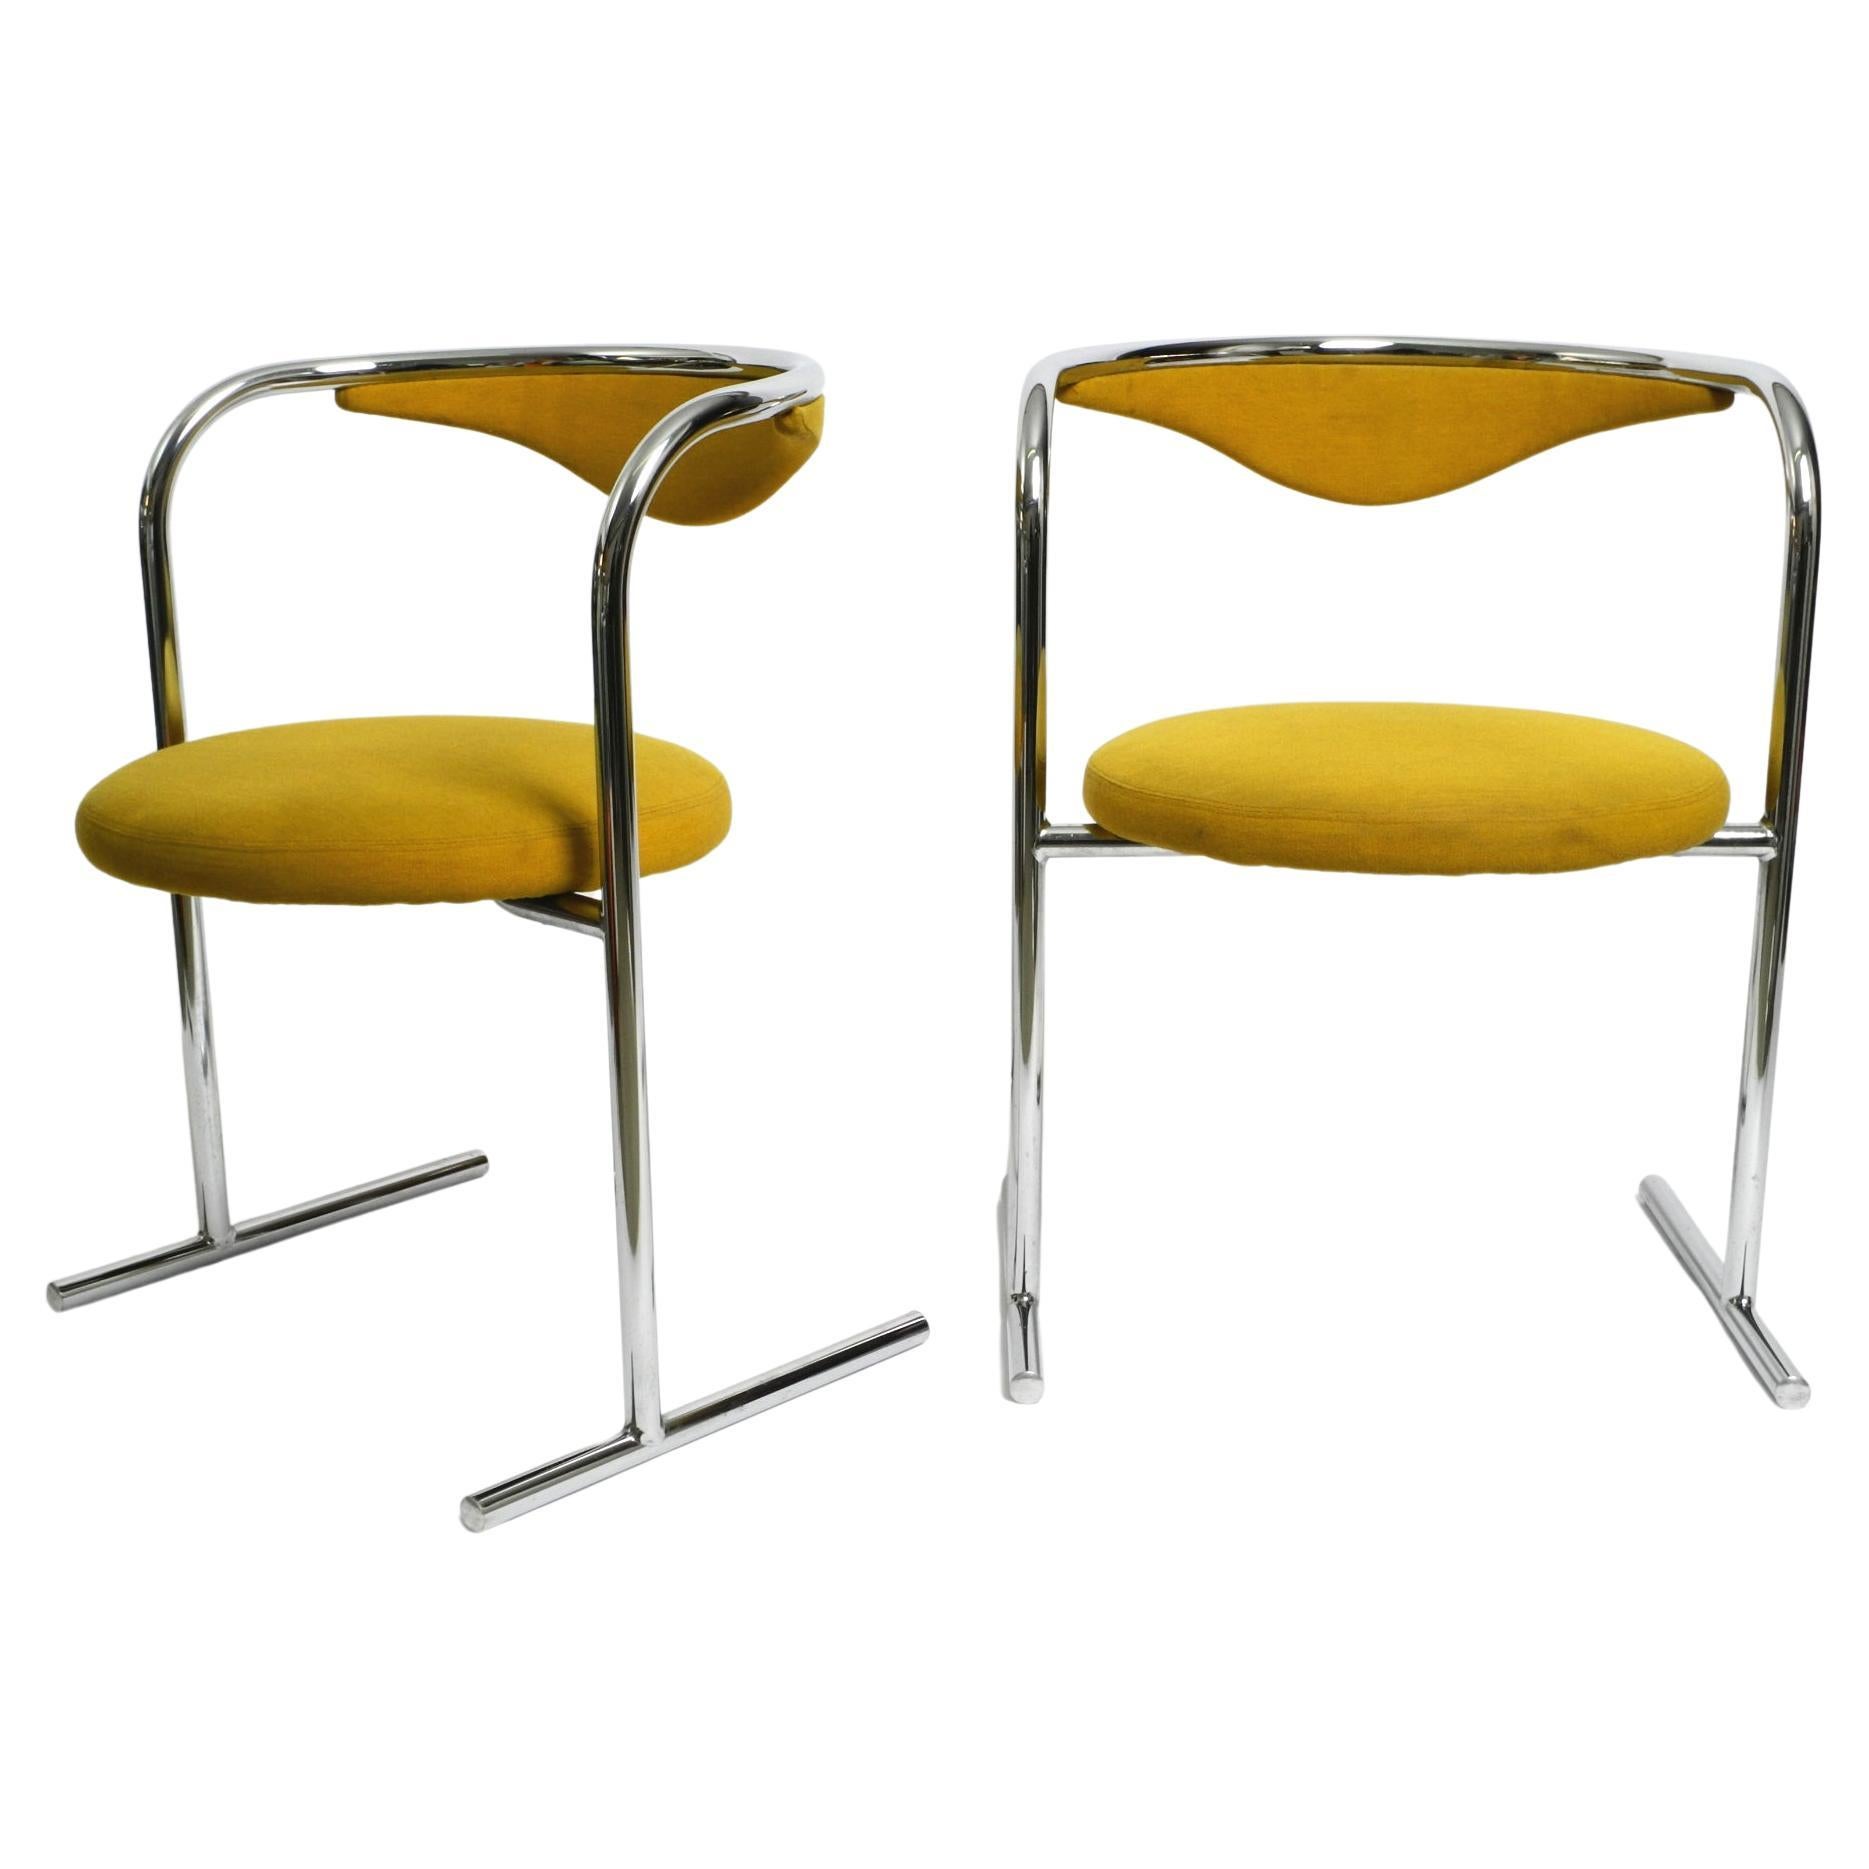 How can you tell if a Thonet chair is real?